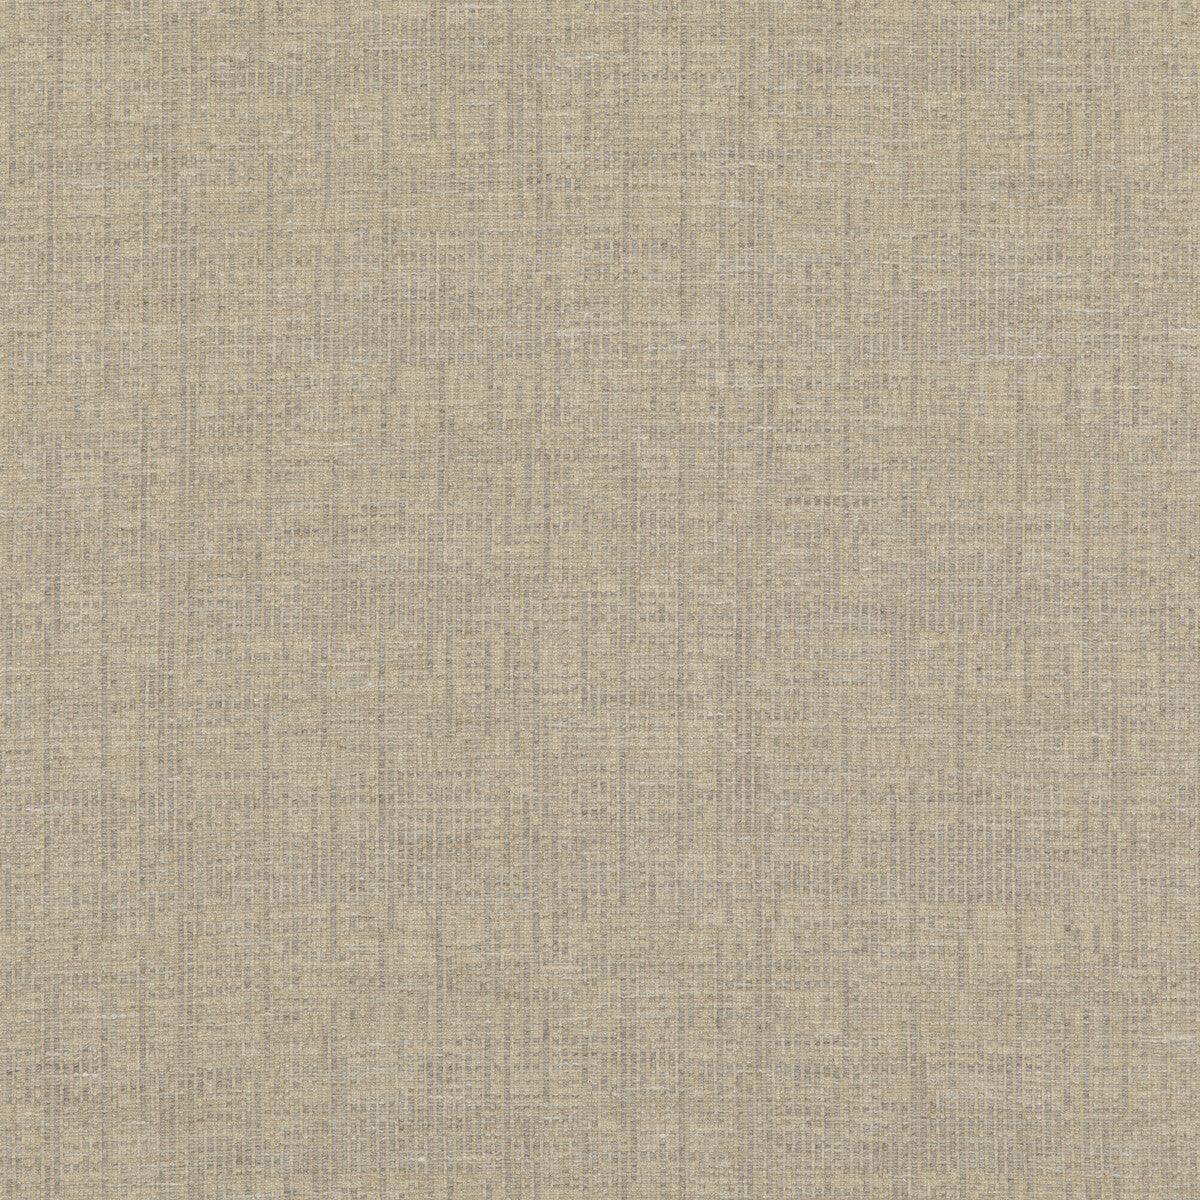 Umbra fabric in dove color - pattern ED85327.910.0 - by Threads in the Luxury Weaves II collection